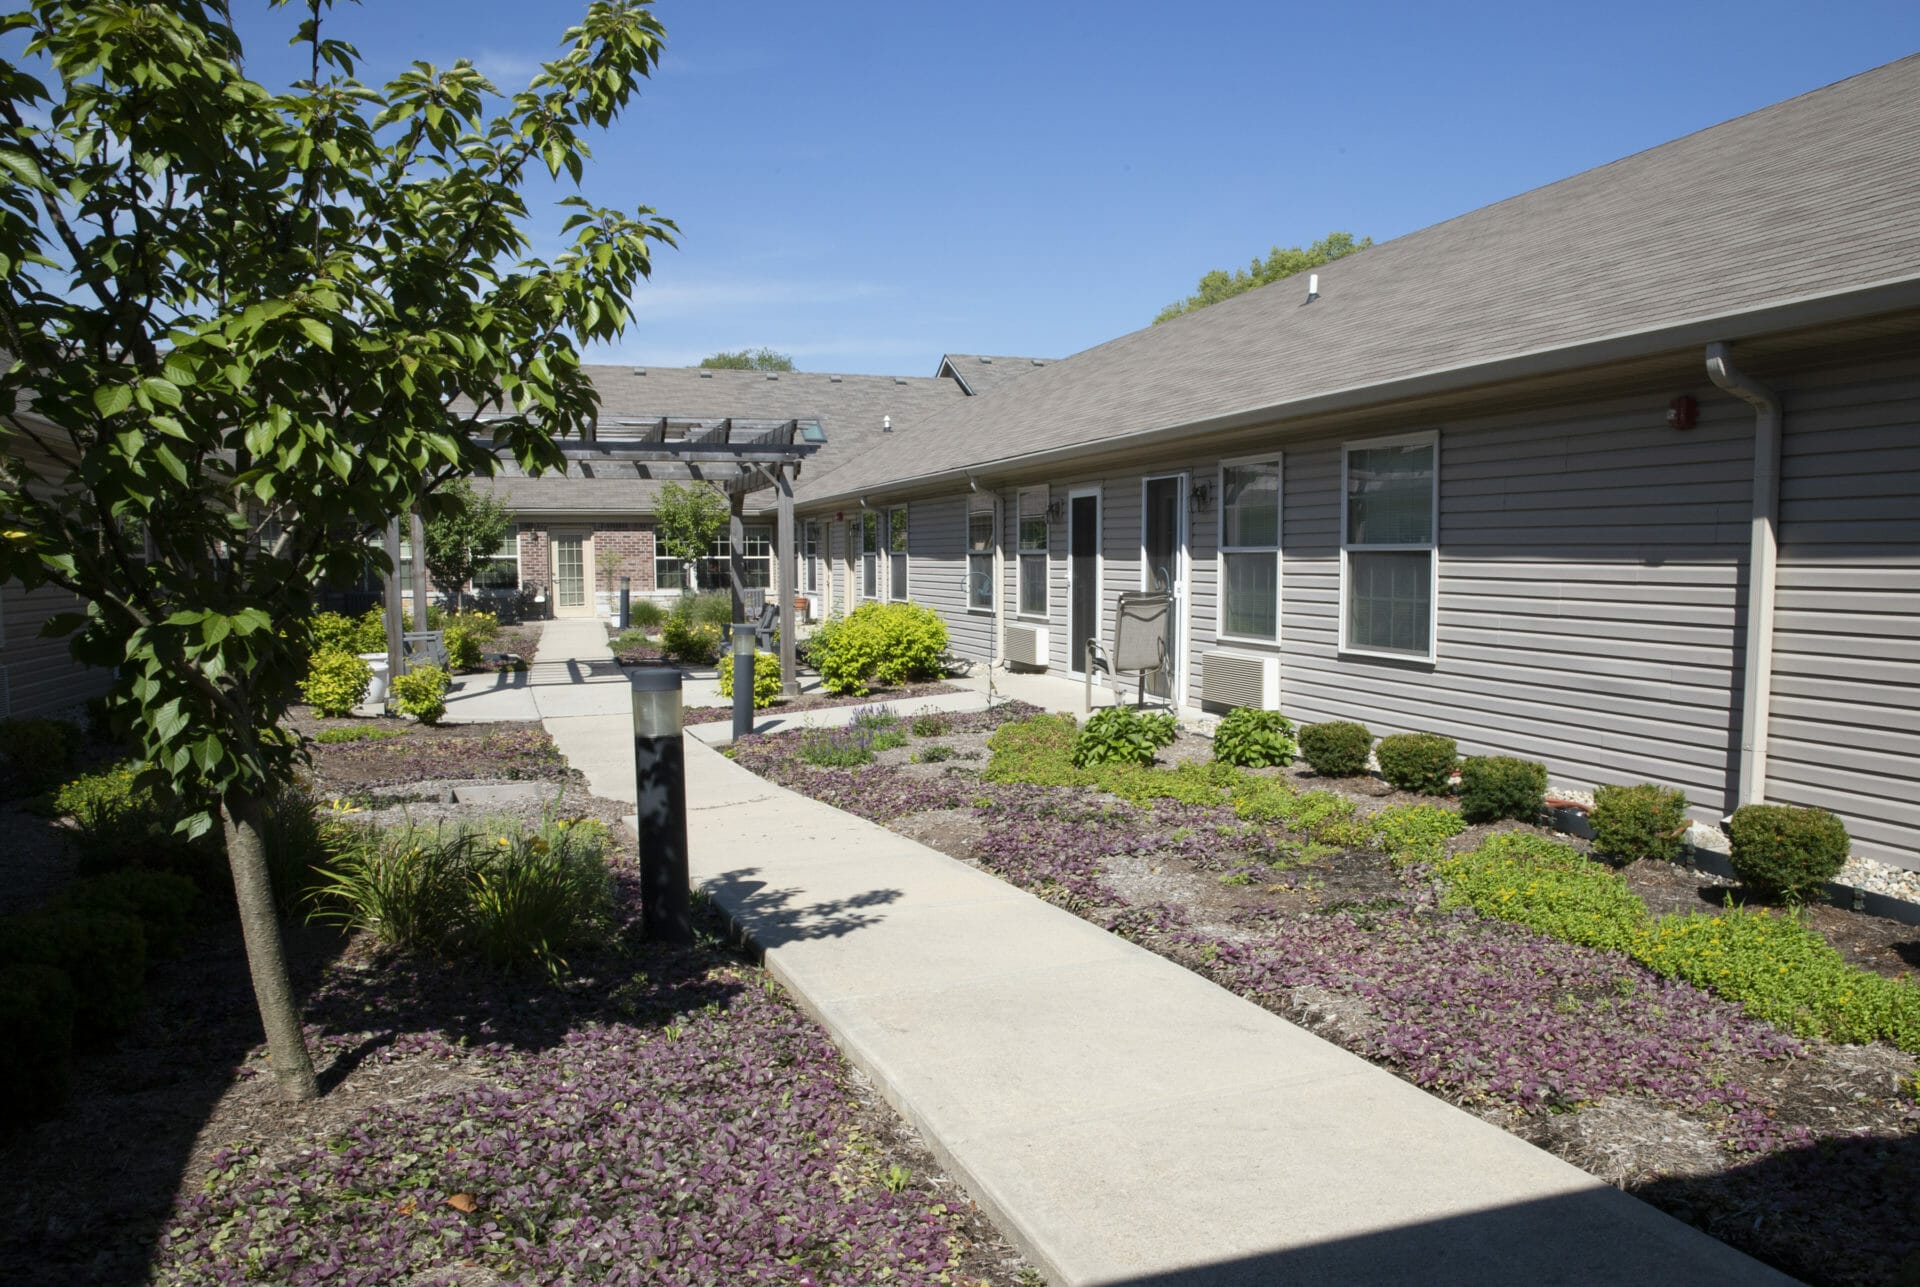 <span  class="uc_style_uc_tiles_grid_image_elementor_uc_items_attribute_title" style="color:#000000;">The back patio of the assisted living apartments.</span>